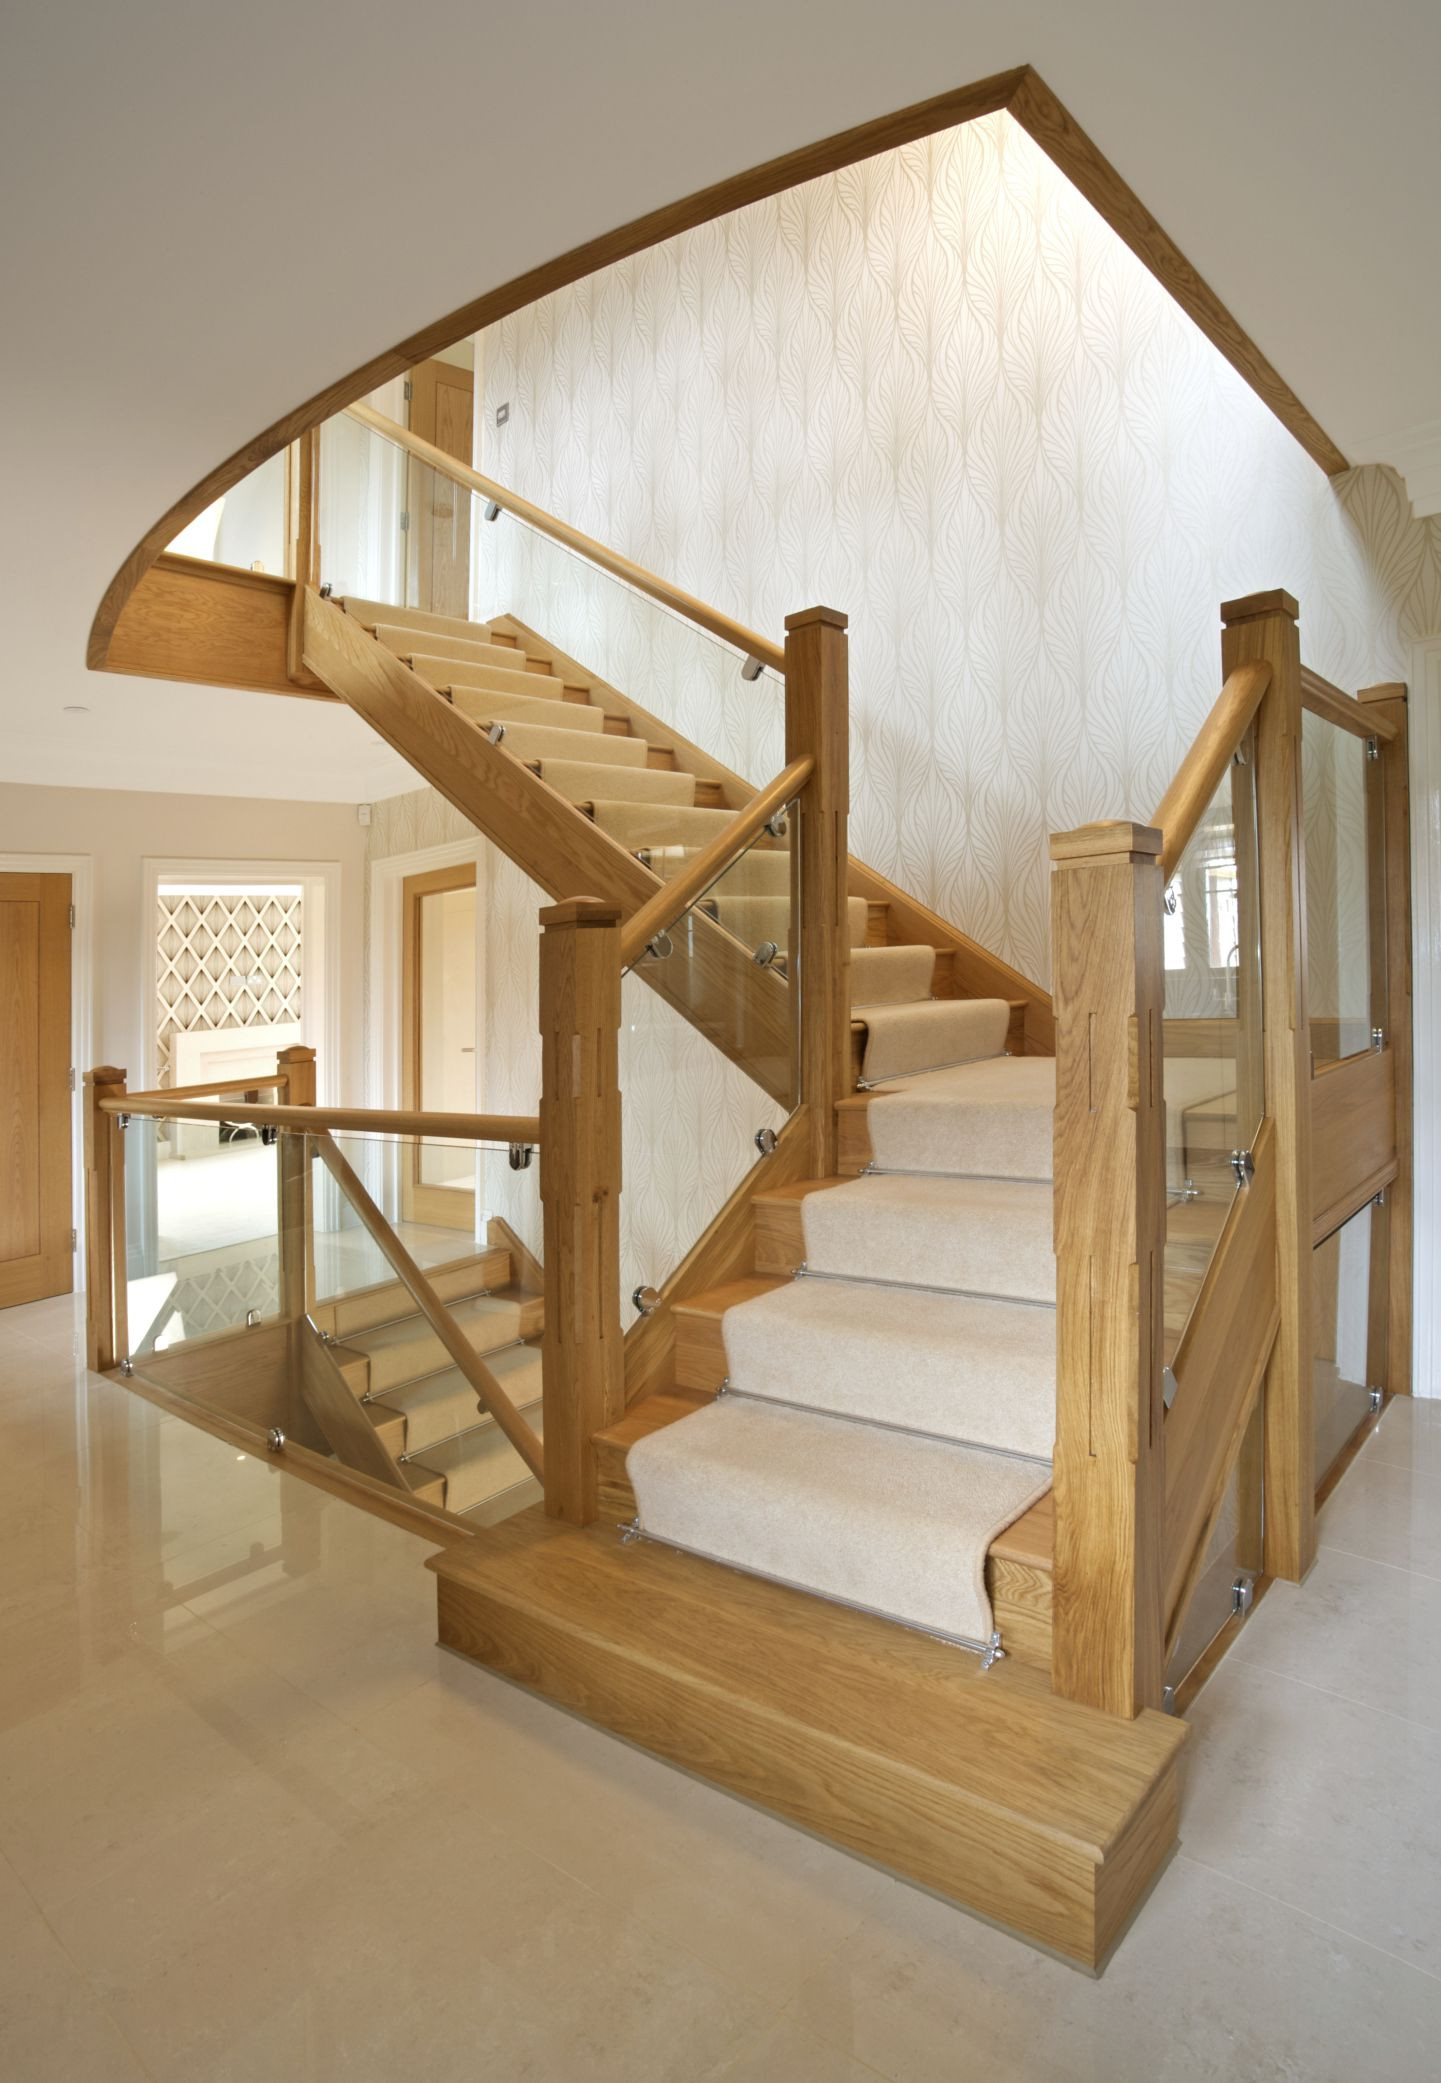 29 Wonderful Hardwood Floor Stairs Slippery 2022 free download hardwood floor stairs slippery of patterned carpet with recessed lighting with regard to modern stair runner on light wood 56a8124c5f9b58b7d0f063c7